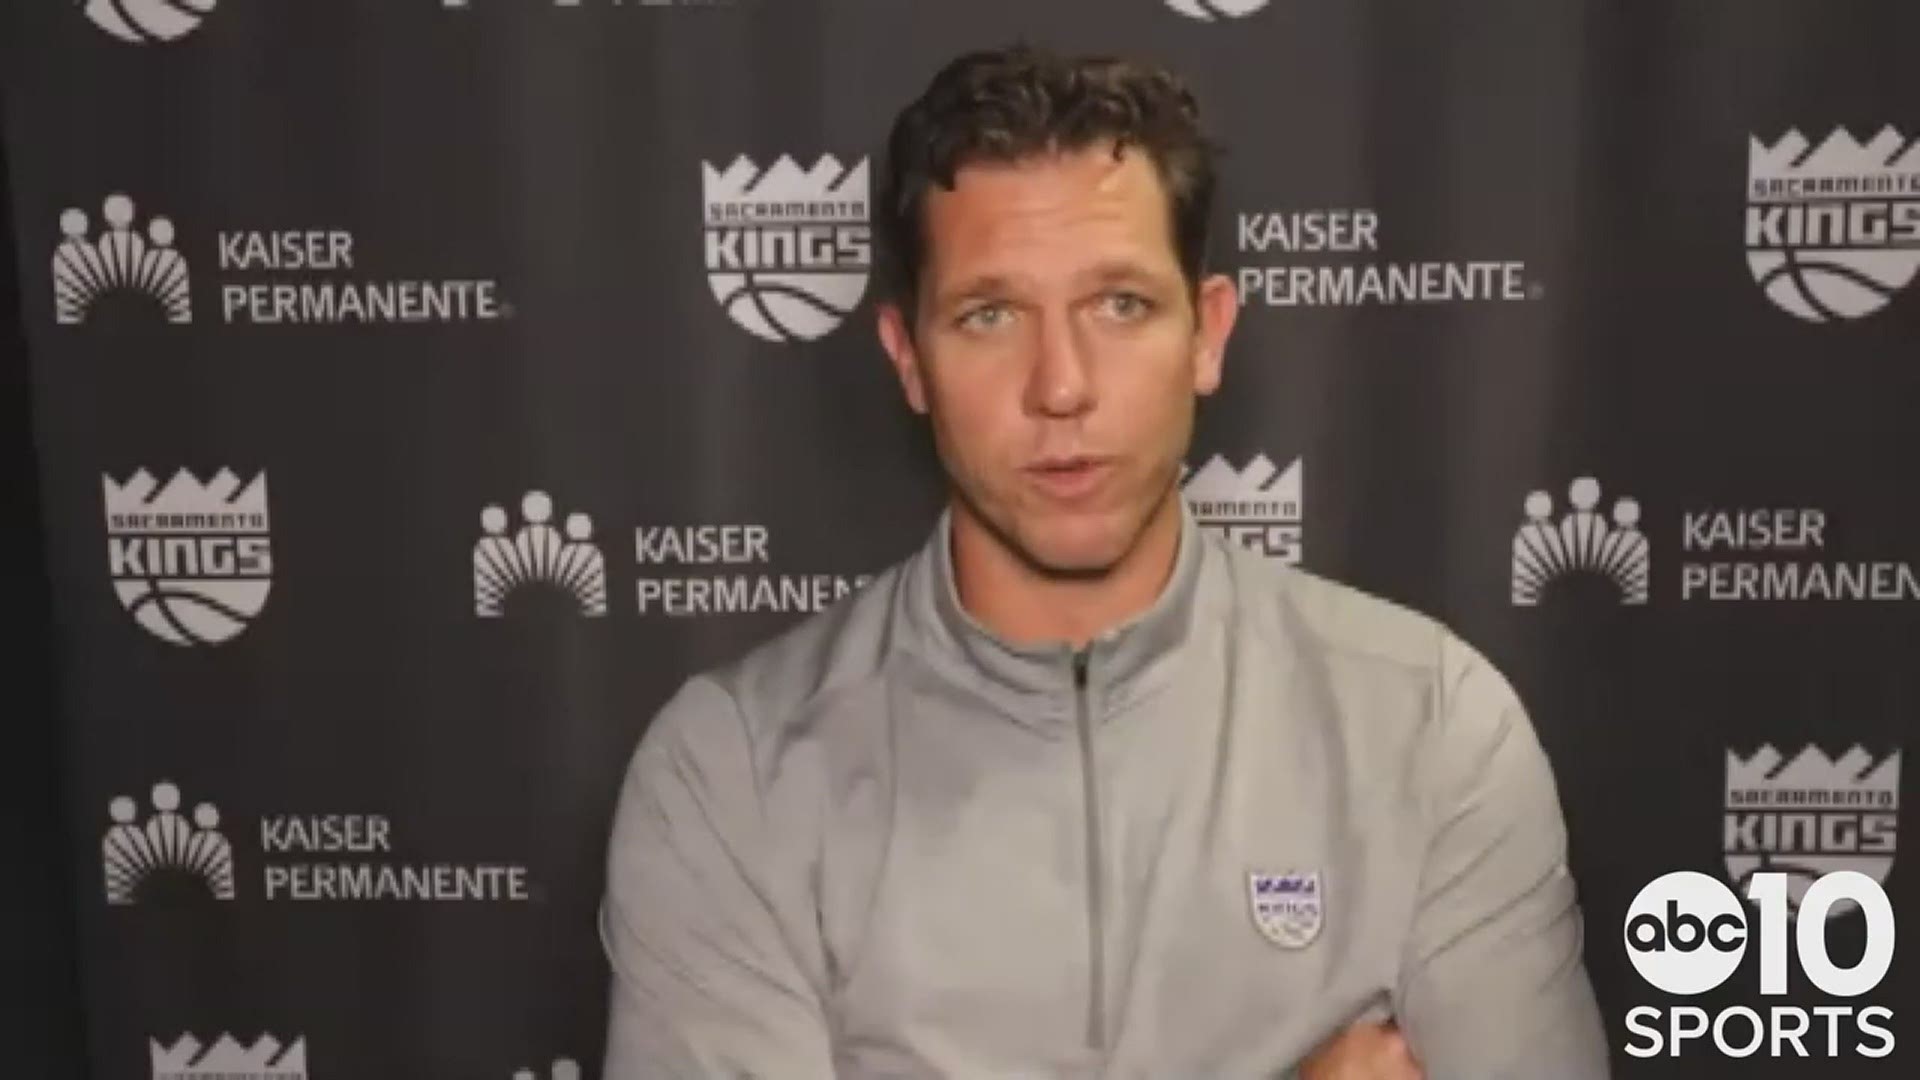 Kings' coach Luke Walton chats about Sacramento's 110-106 victory over LeBron James and the Lakers in Los Angeles and the performance from rookie Tyrese Haliburton.